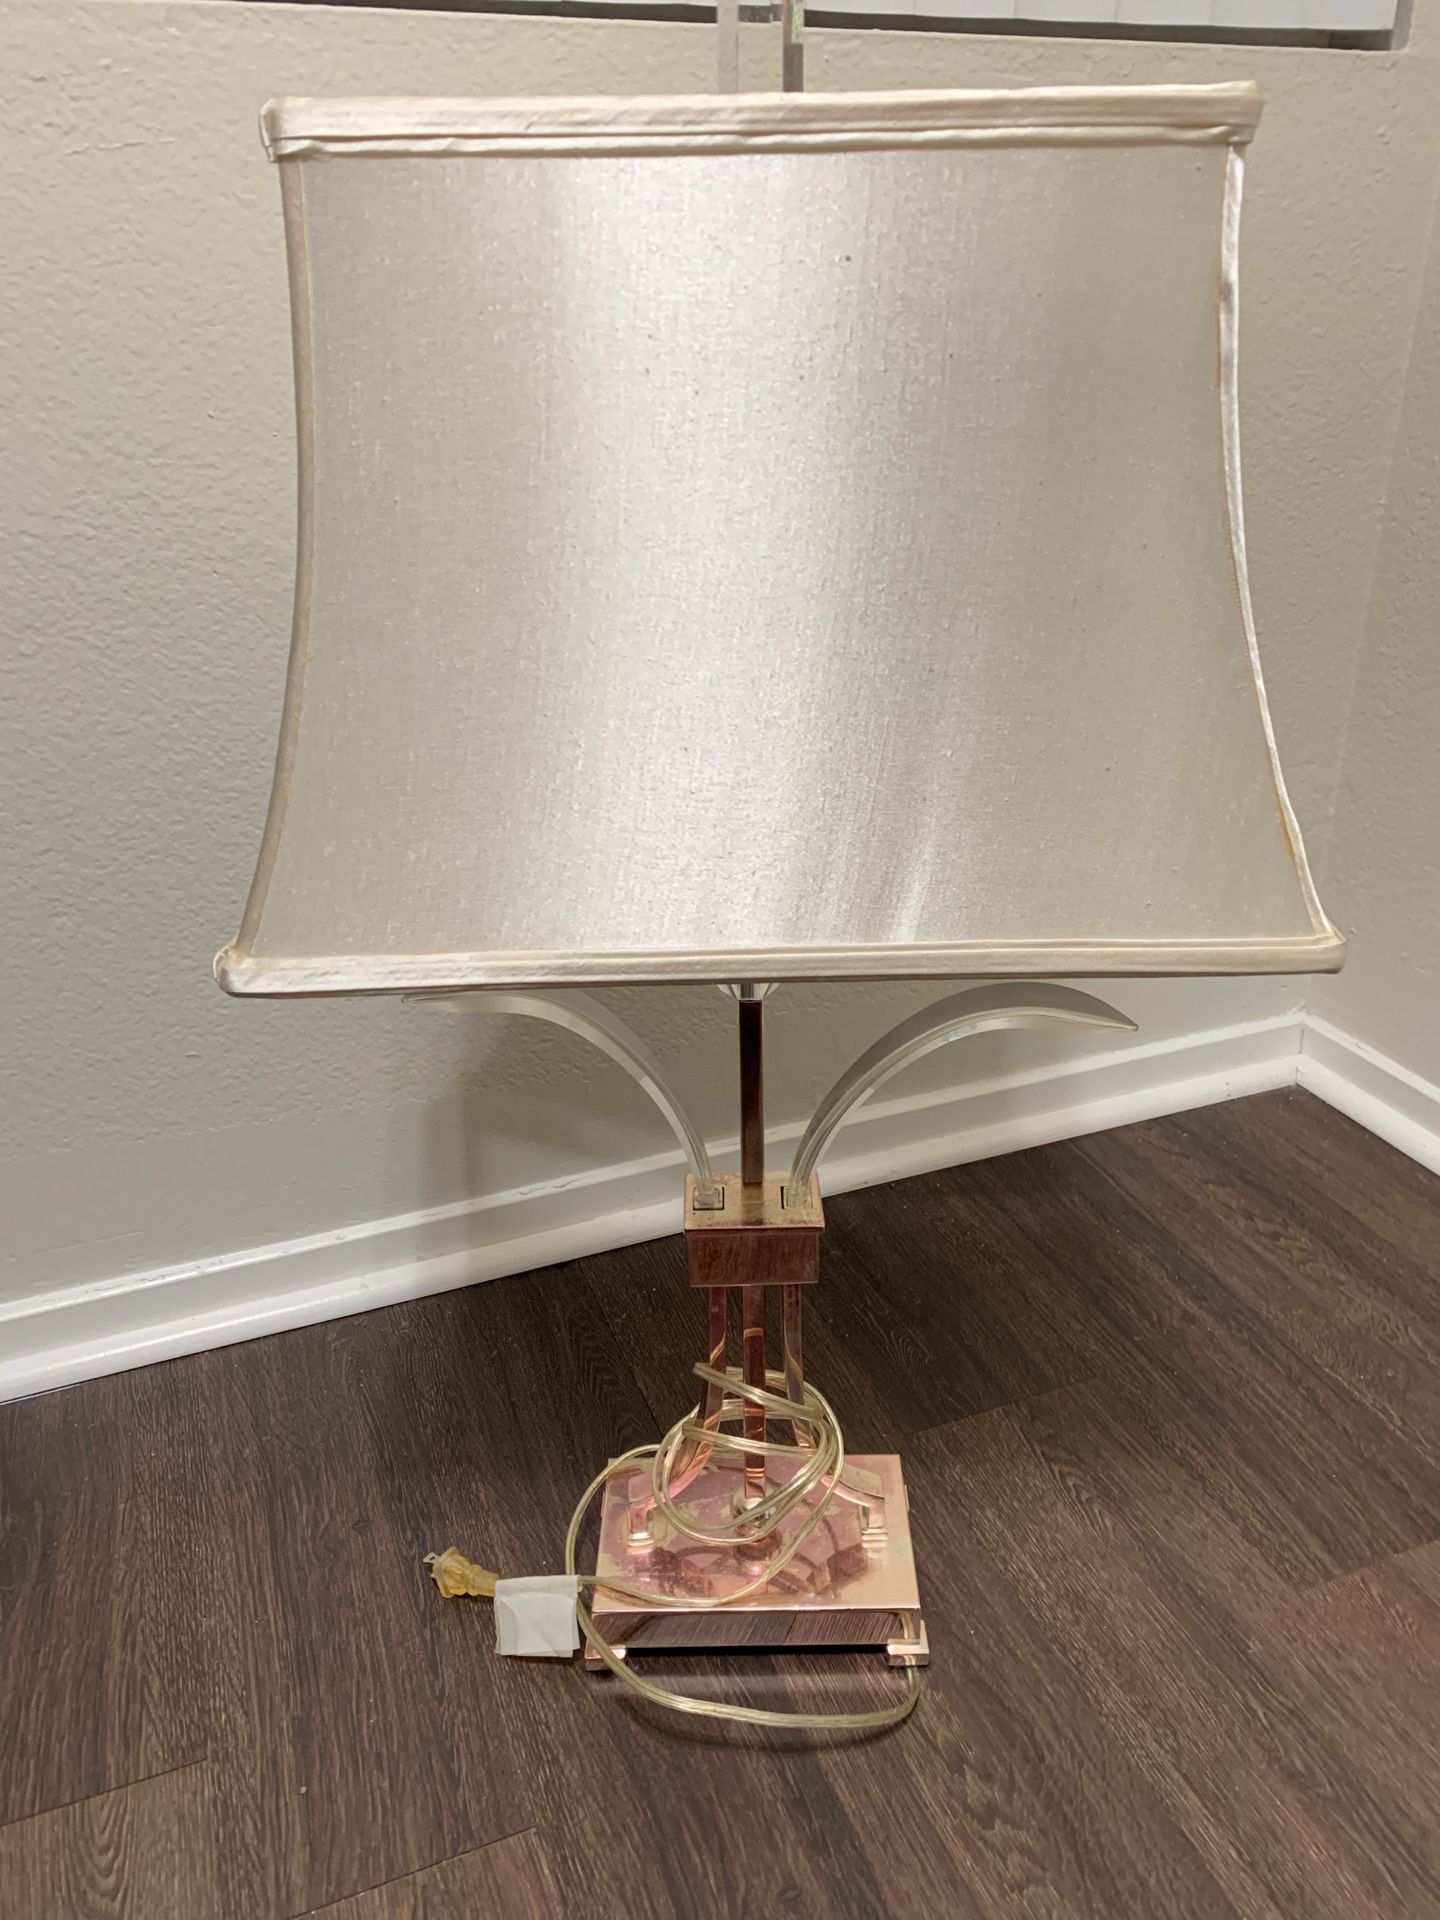 Antique brass rose gold lamp with authentic Crystal accents